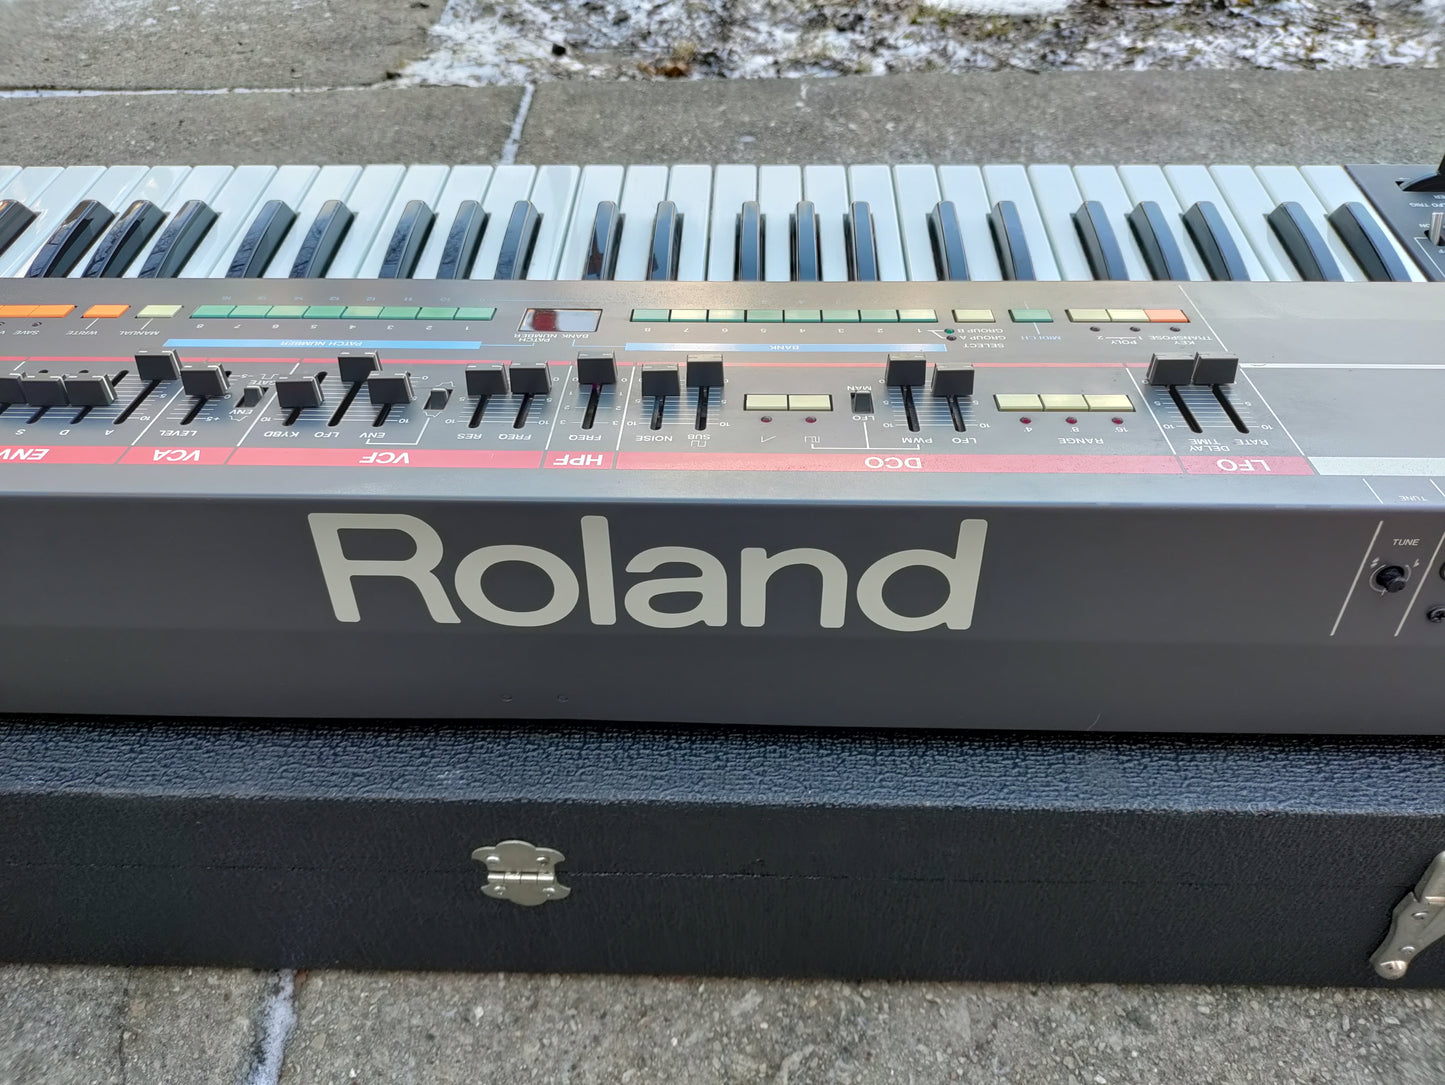 Roland Juno 106 Synth and Flight Case - Refurbished